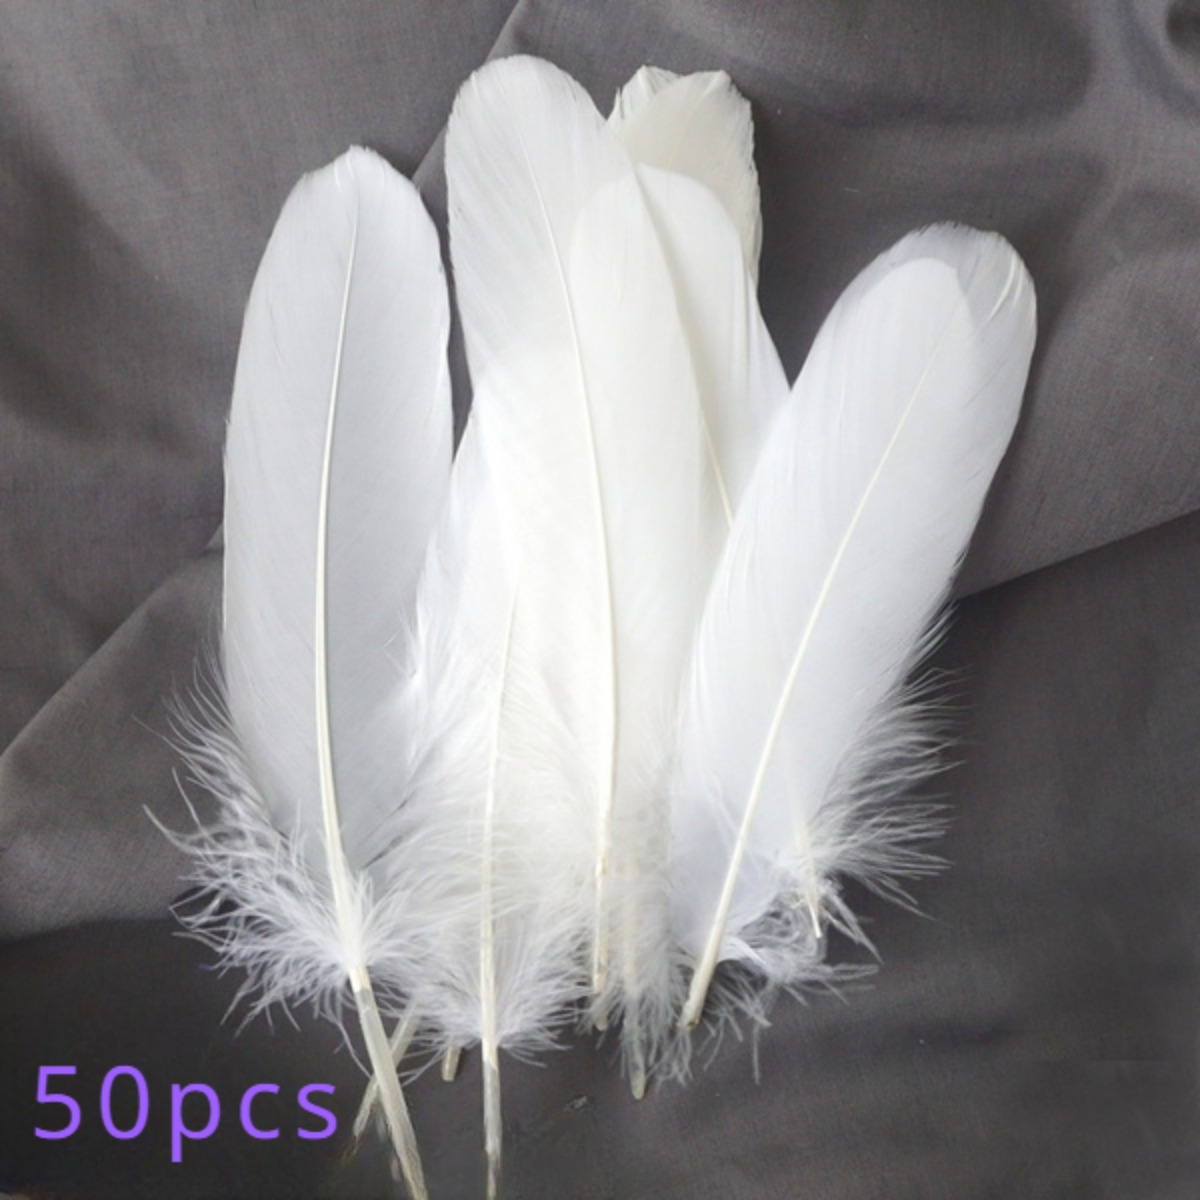 Gold Goose Feather Silver Turkey Plumes Handicraft Accessories Golden Duck  Feathers Table Centerpieces Wedding Party Decoration